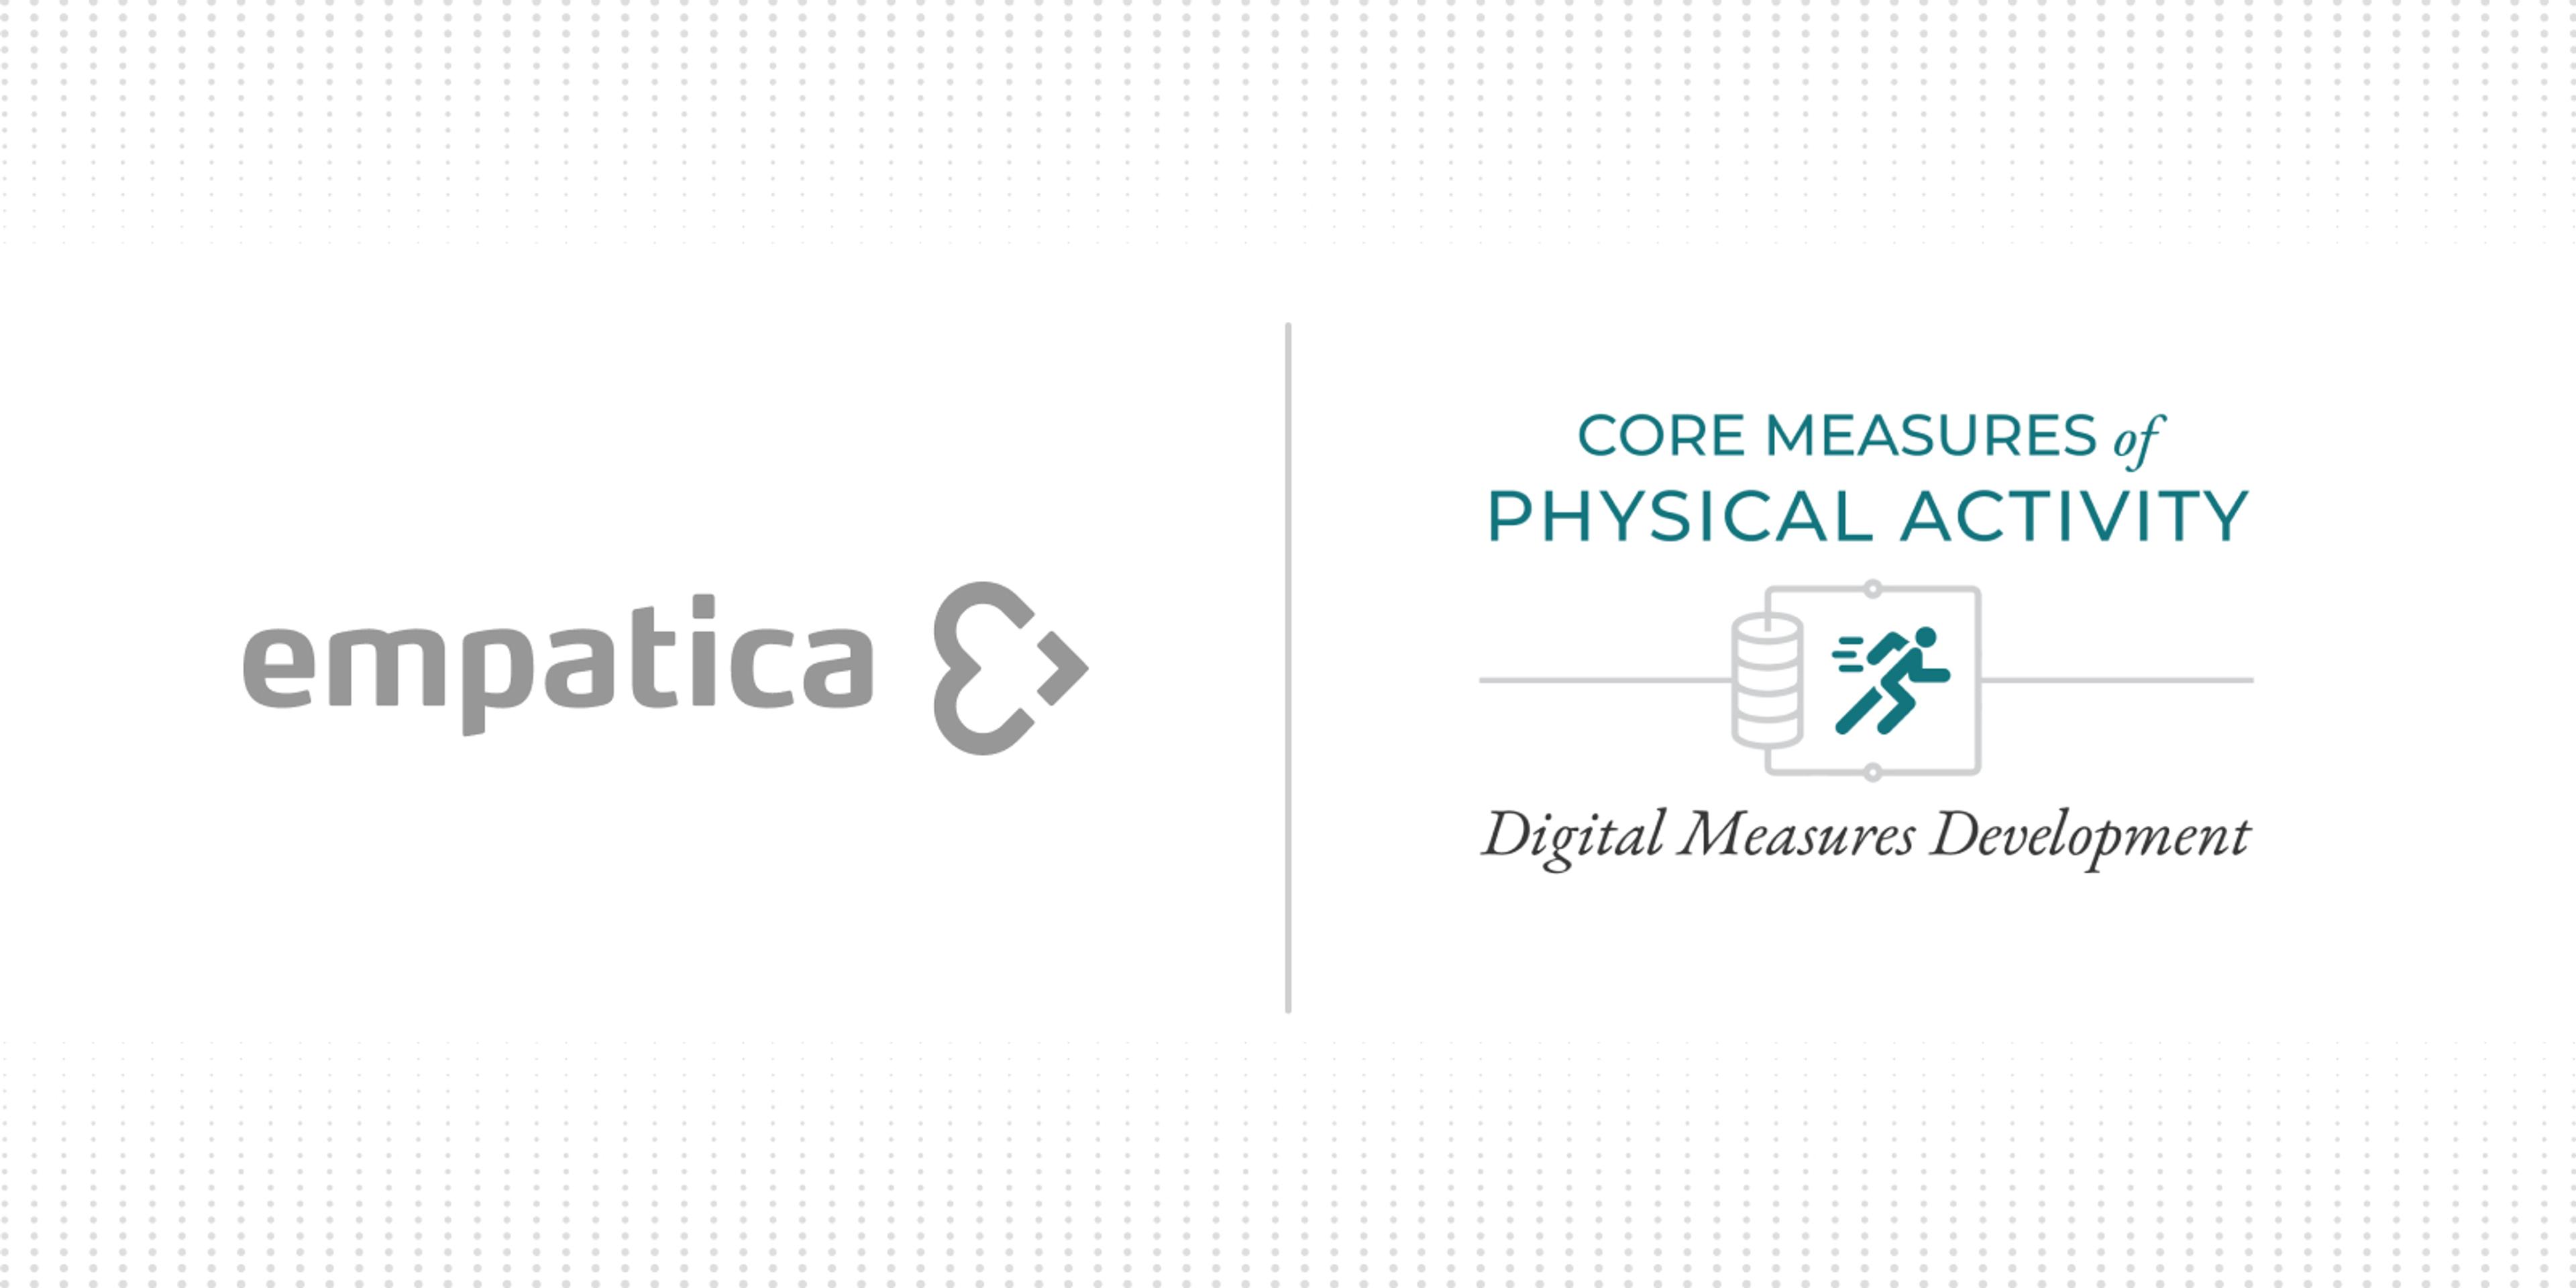 Empatica partners with DiMe as a collaborater on project to develop cores set of measures of physical activity